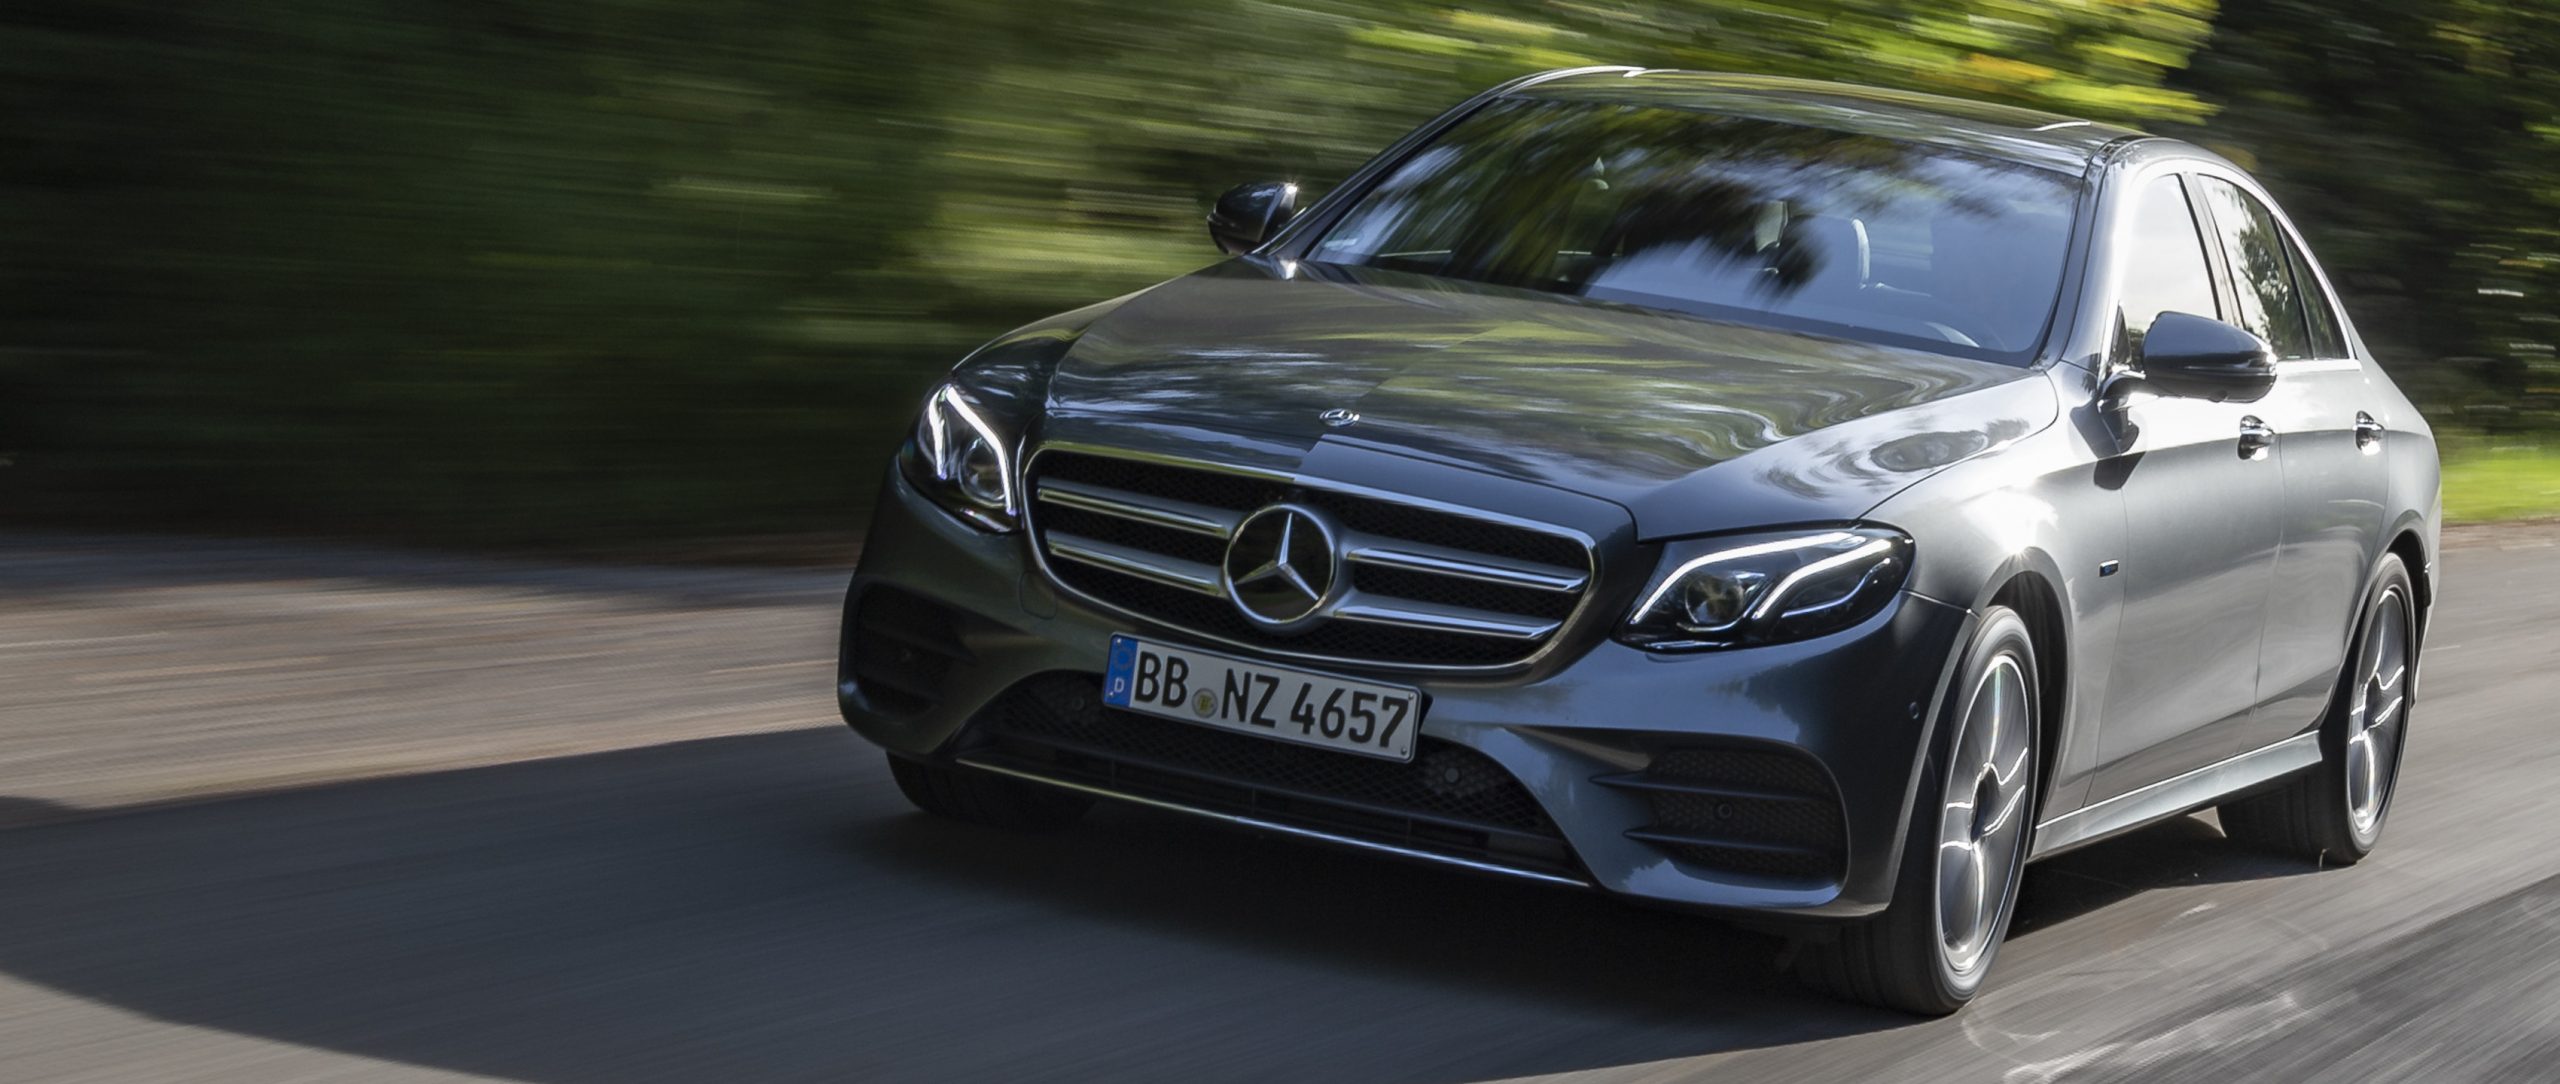 Mercedes E class scaled - Top selling executive sedans and saloons